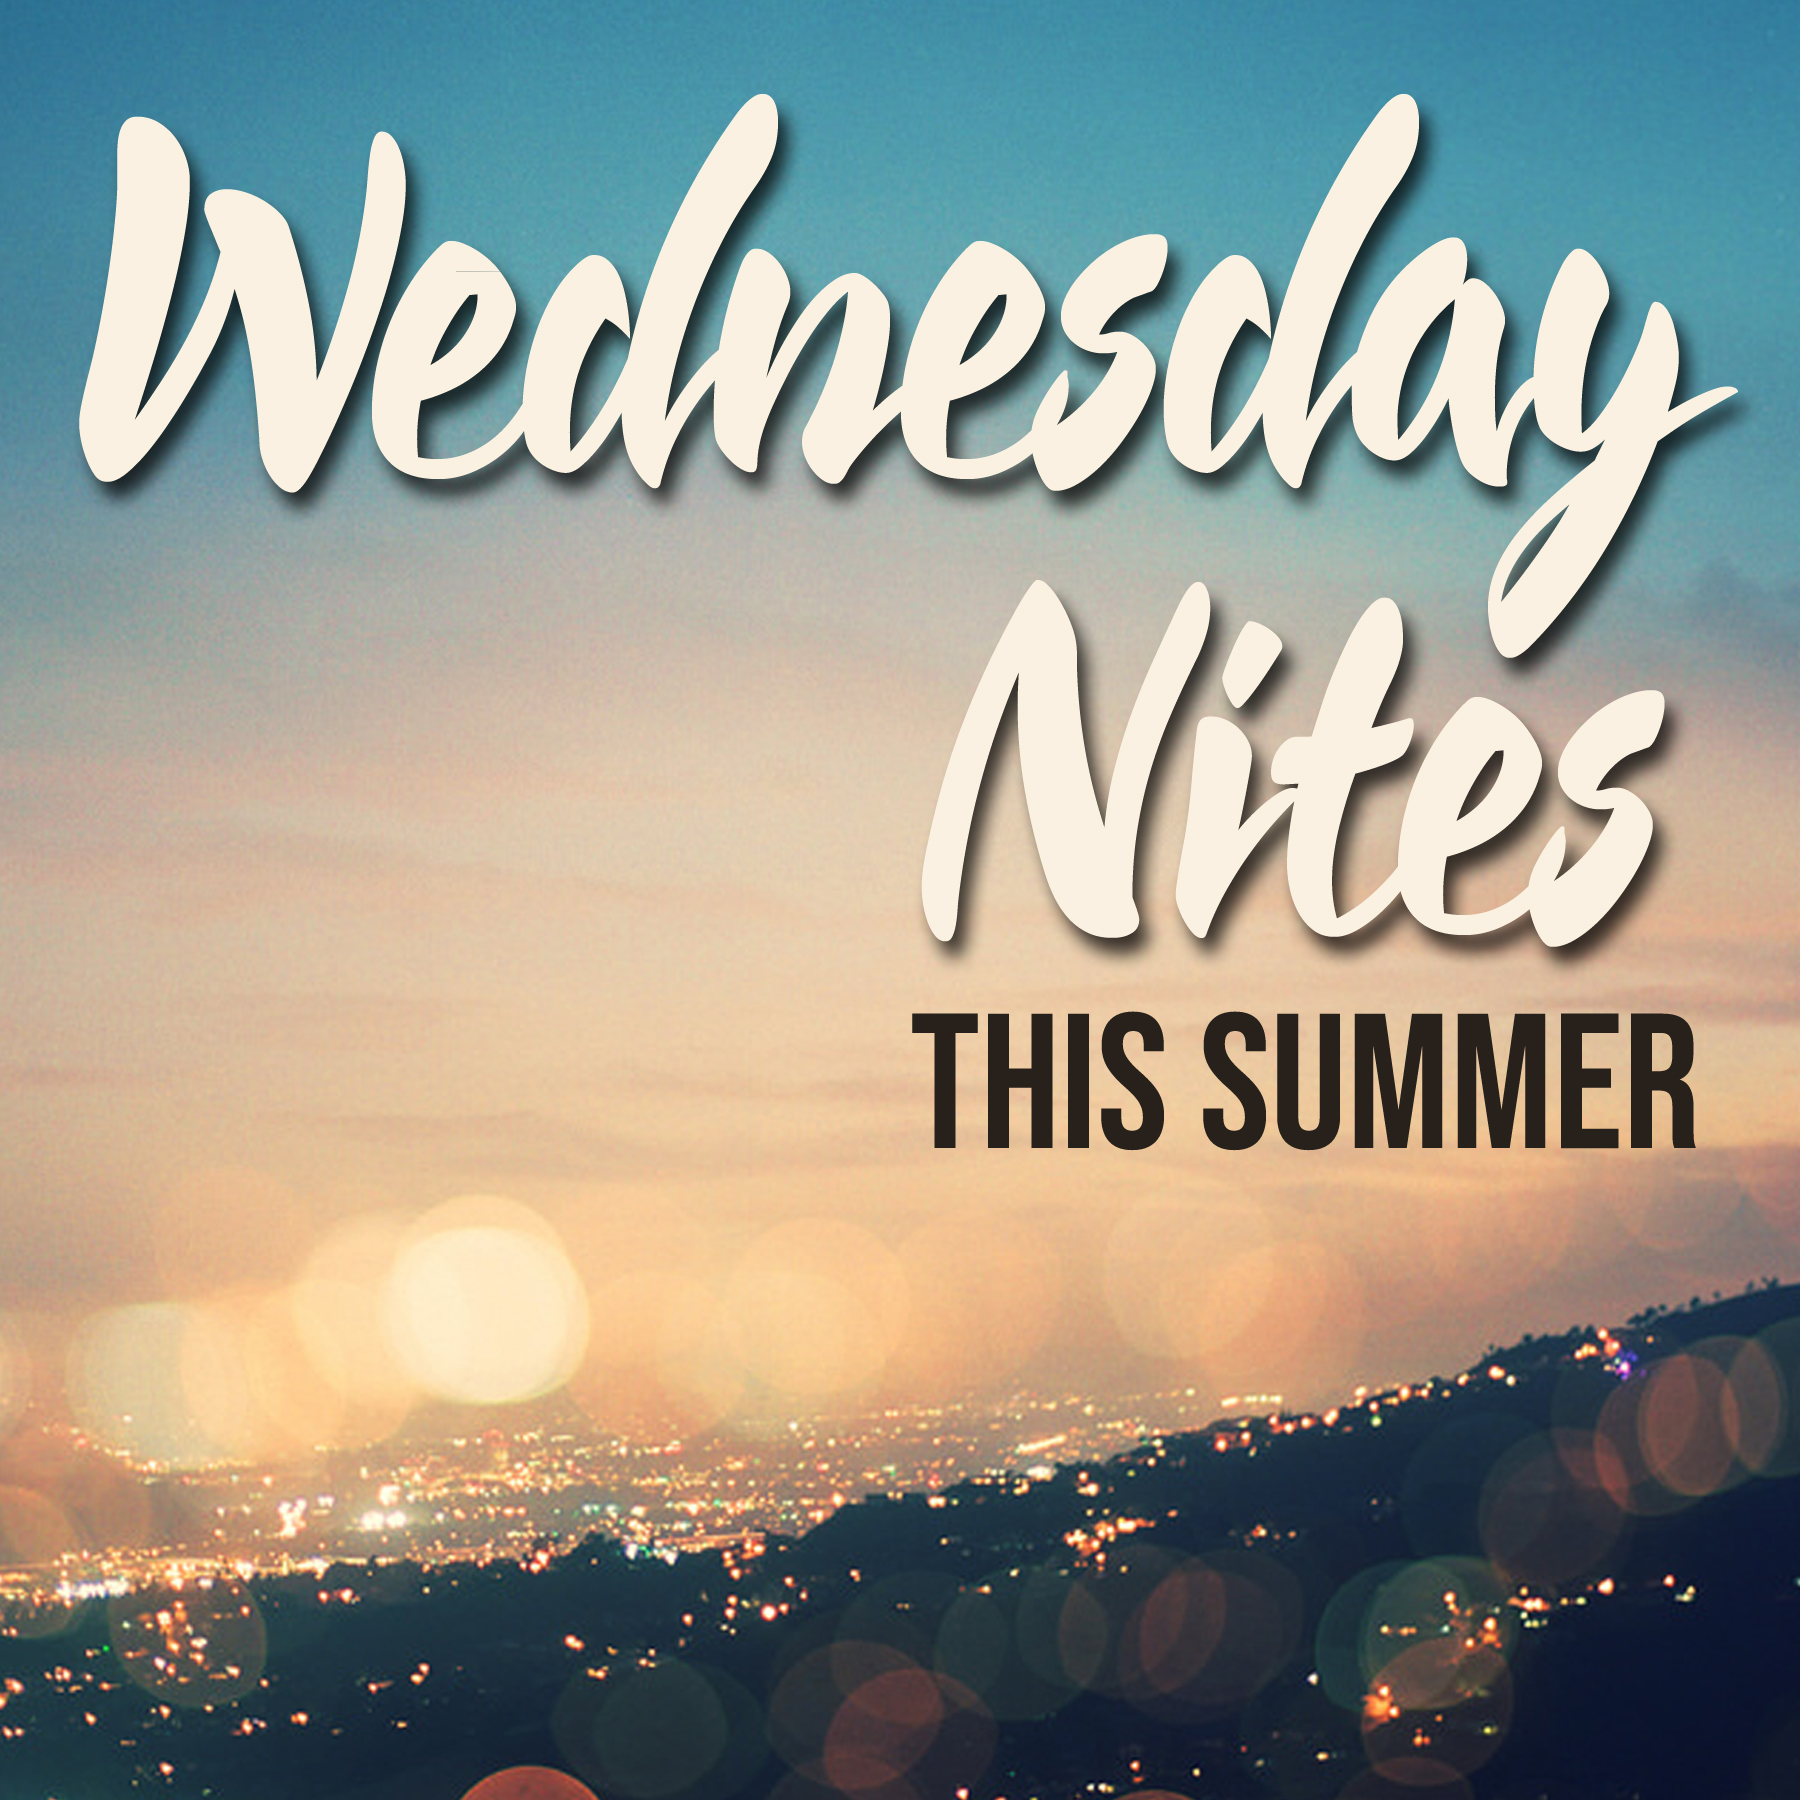 Wednesday Nites this Summer